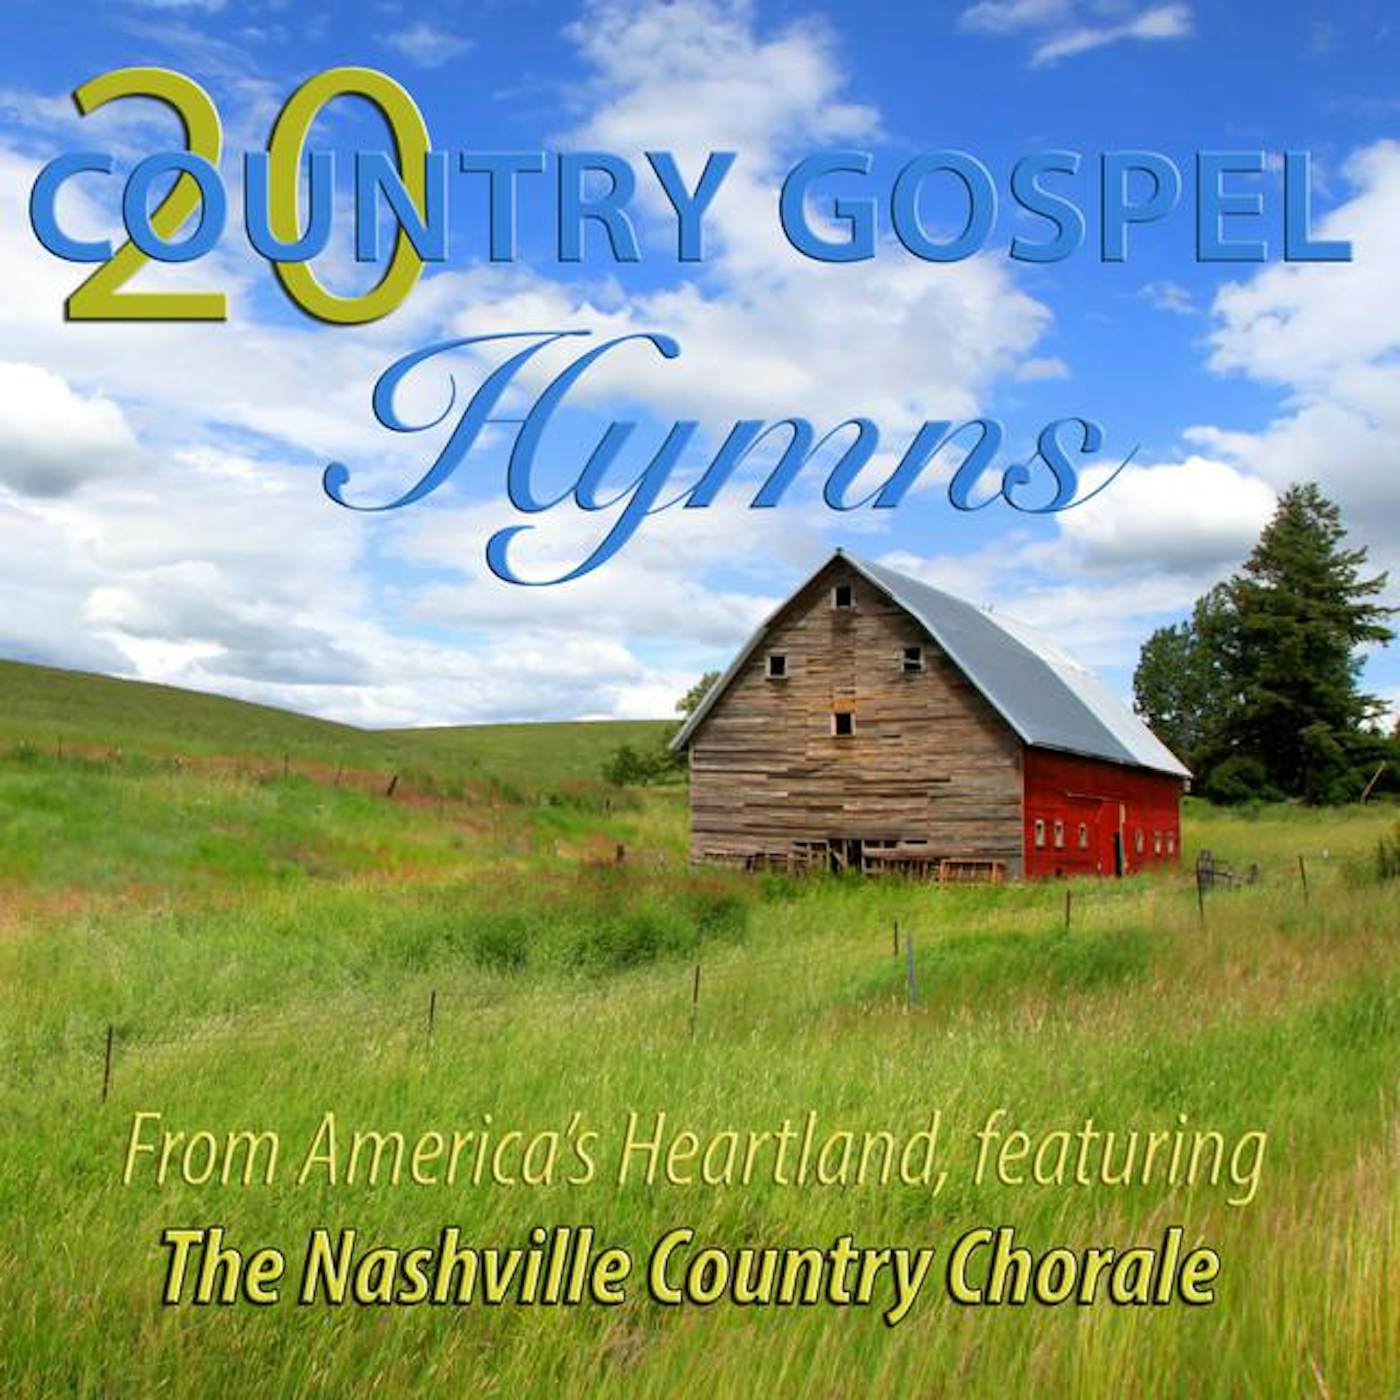 Nashville Country Chorale